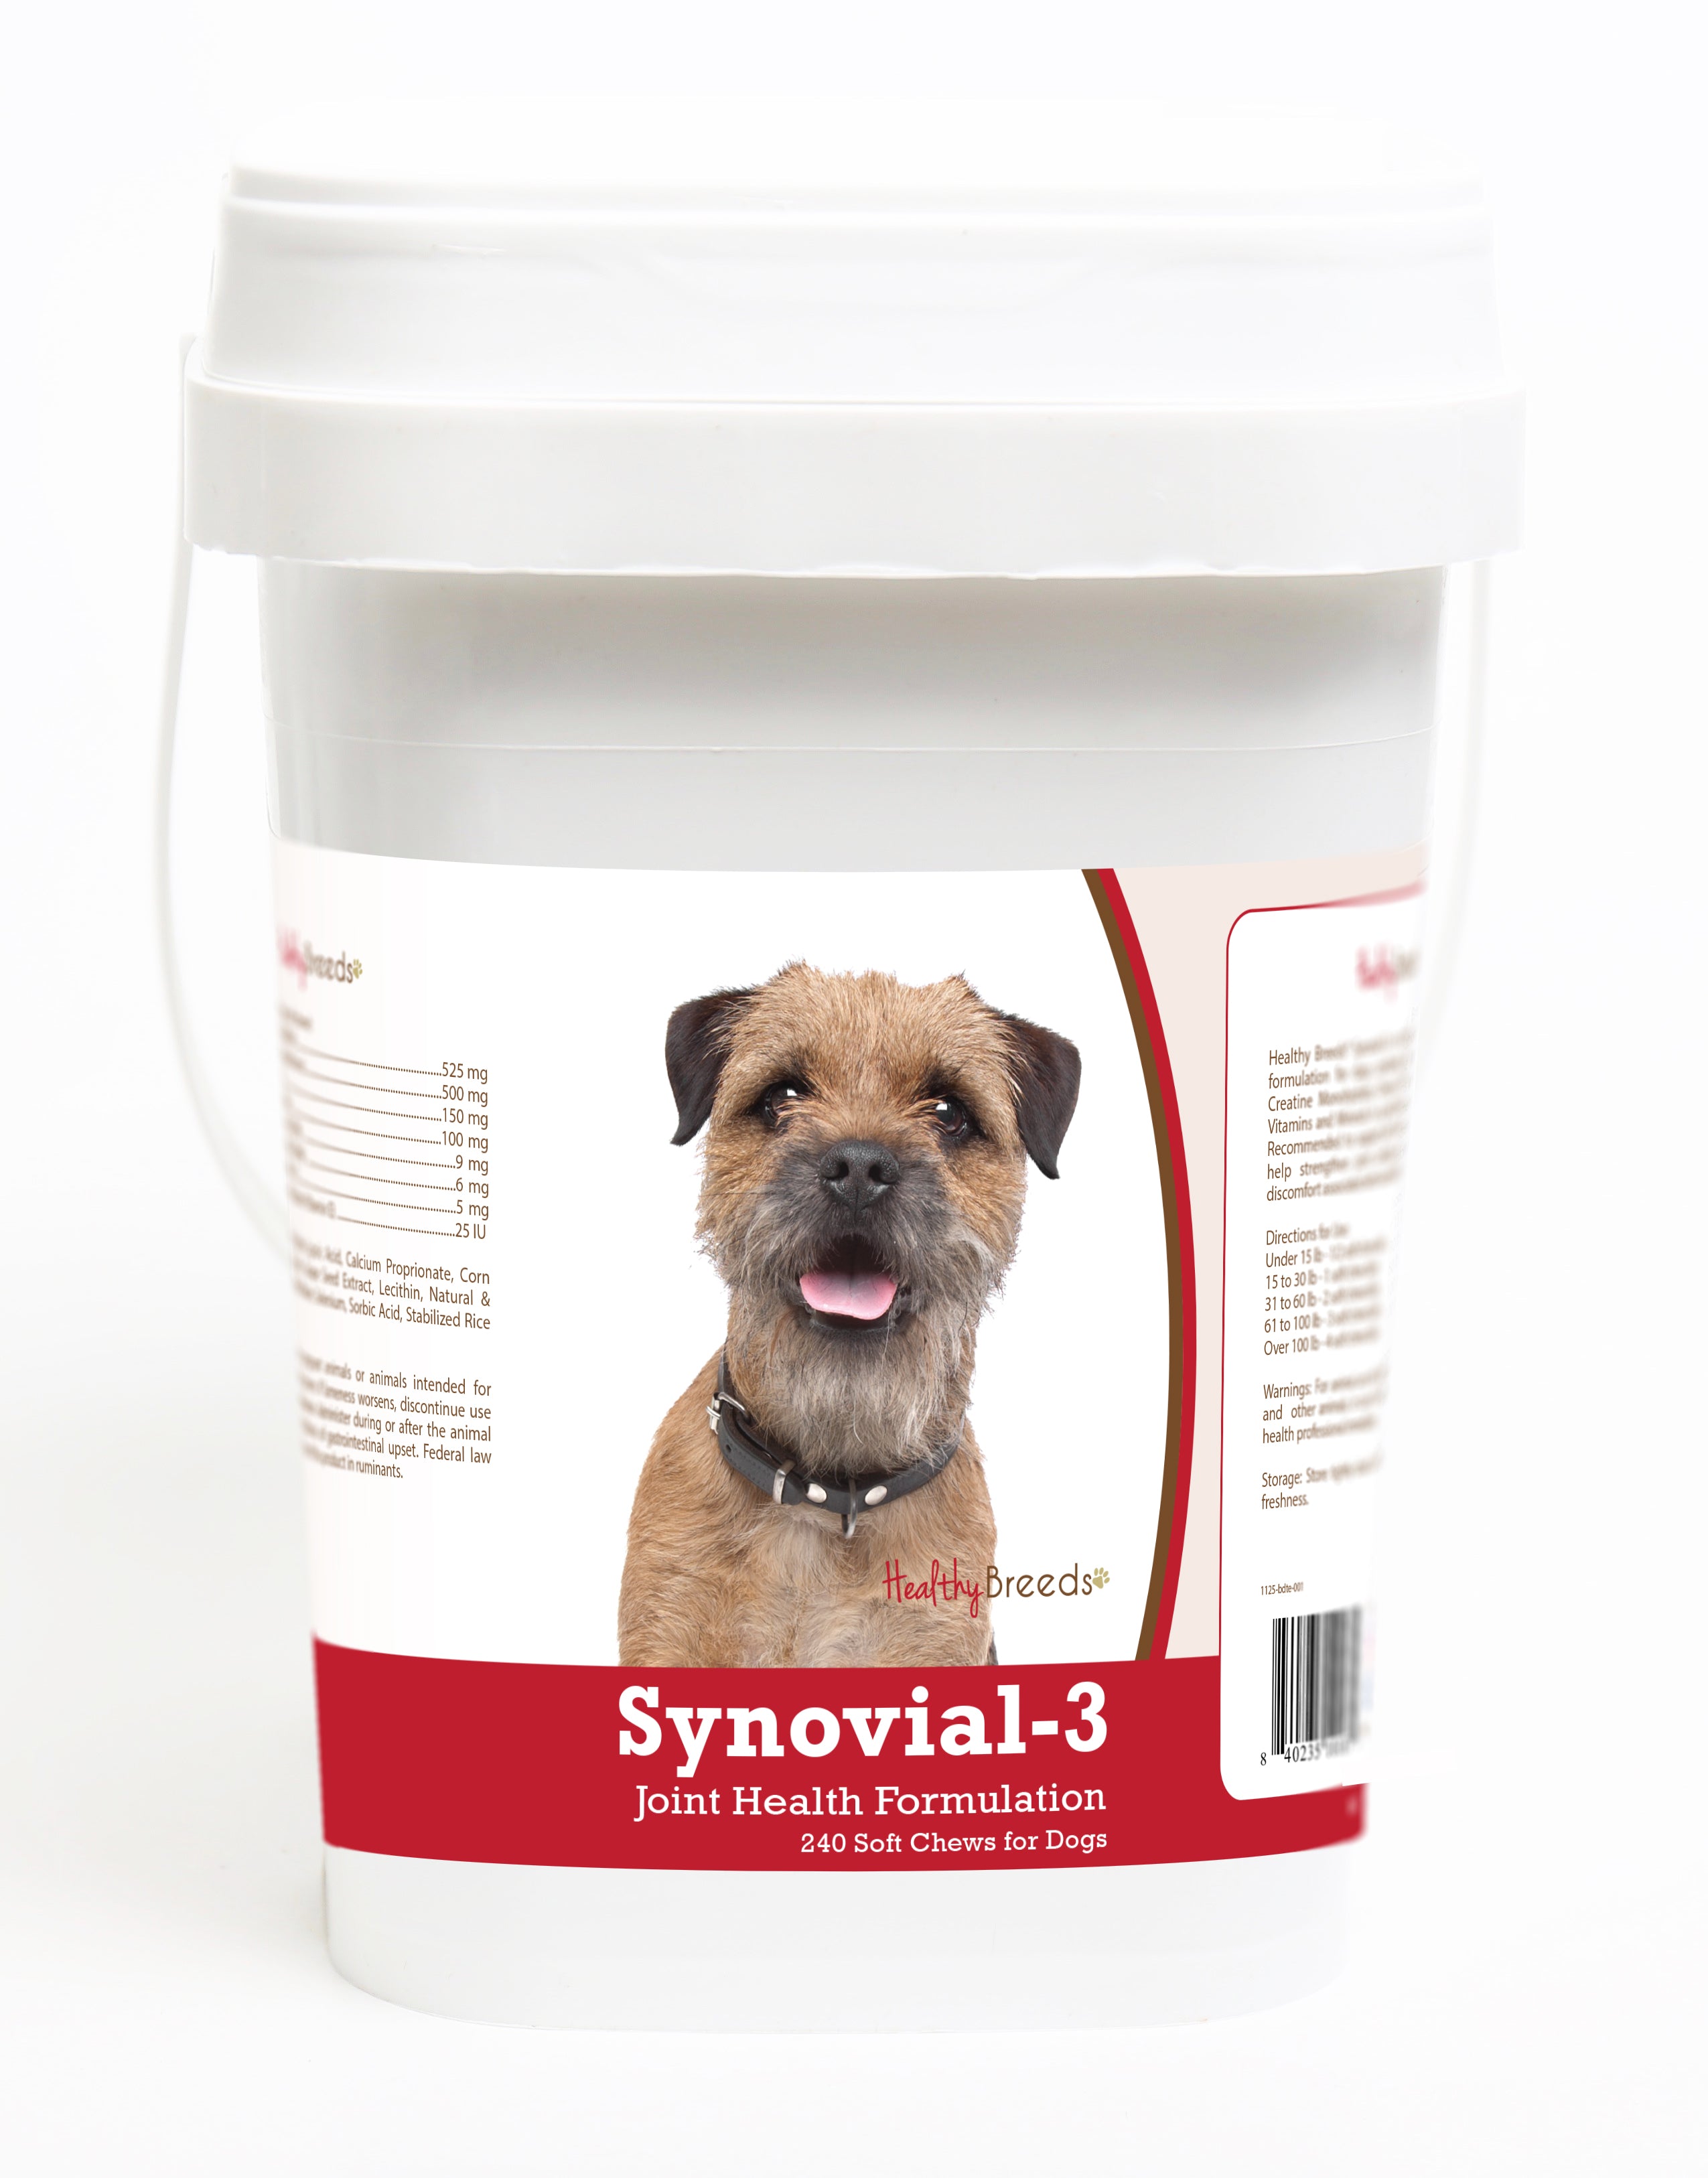 Border Terrier Synovial-3 Joint Health Formulation Soft Chews 240 Count